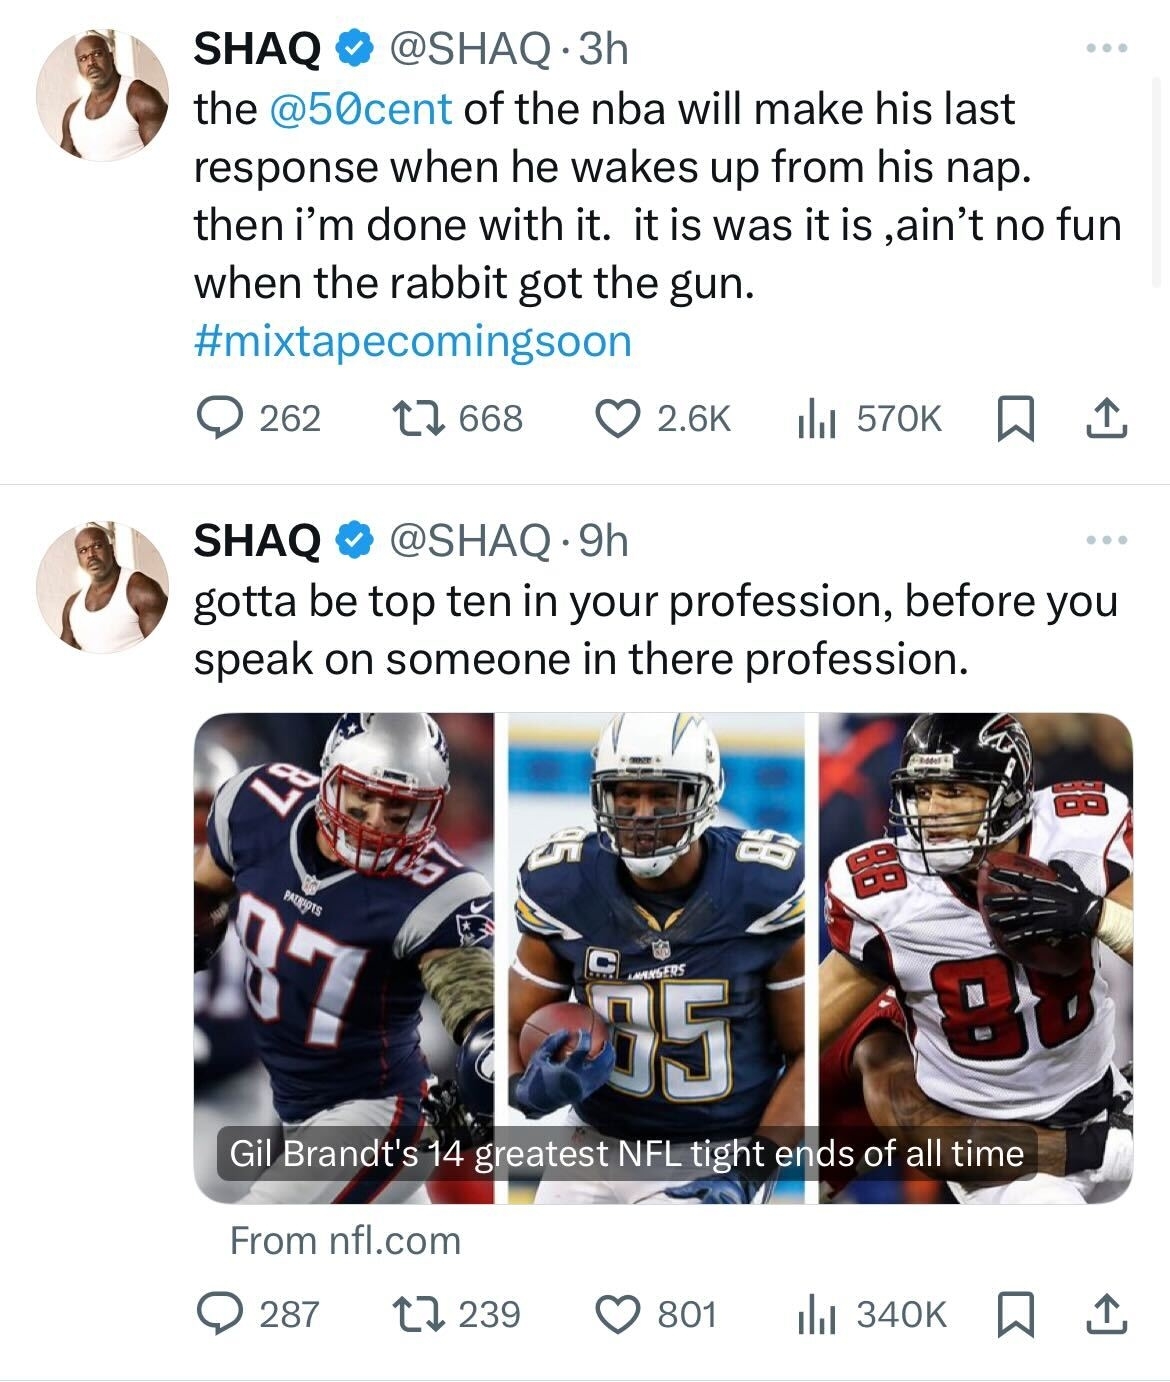 Tweets by SHAQ discussing waking up 50 Cent and a list of greatest NFL tight ends